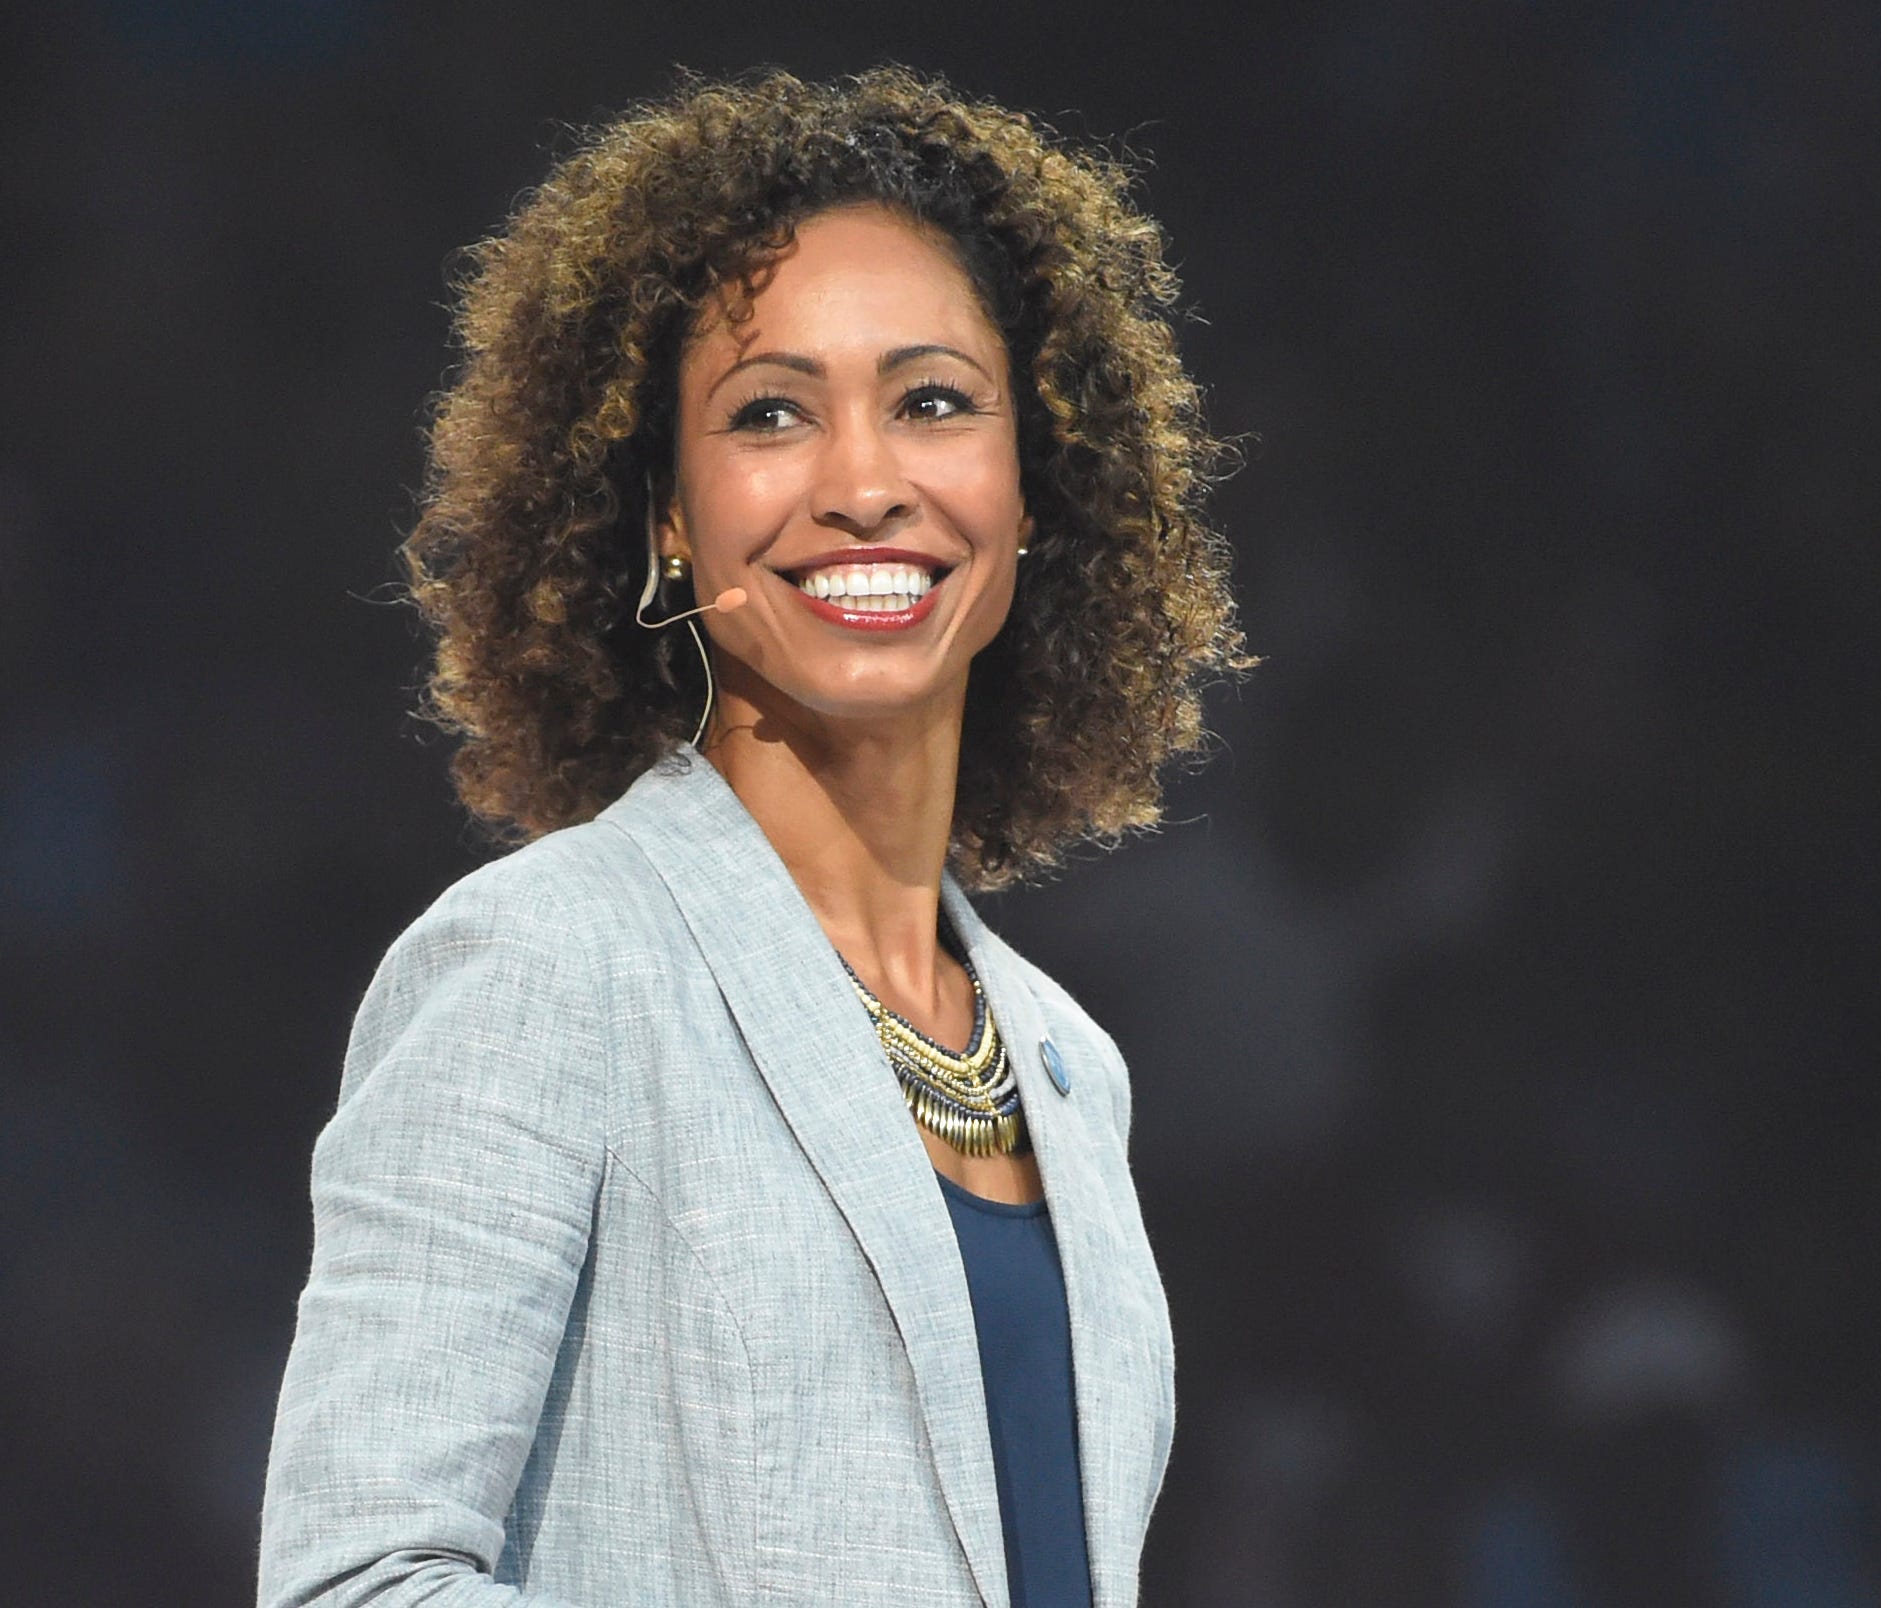 ESPN announcer Sage Steele during a tribute to former fellow ESPN announcer Stuart Scott during Late Night with Roy Williams at Smith Center.